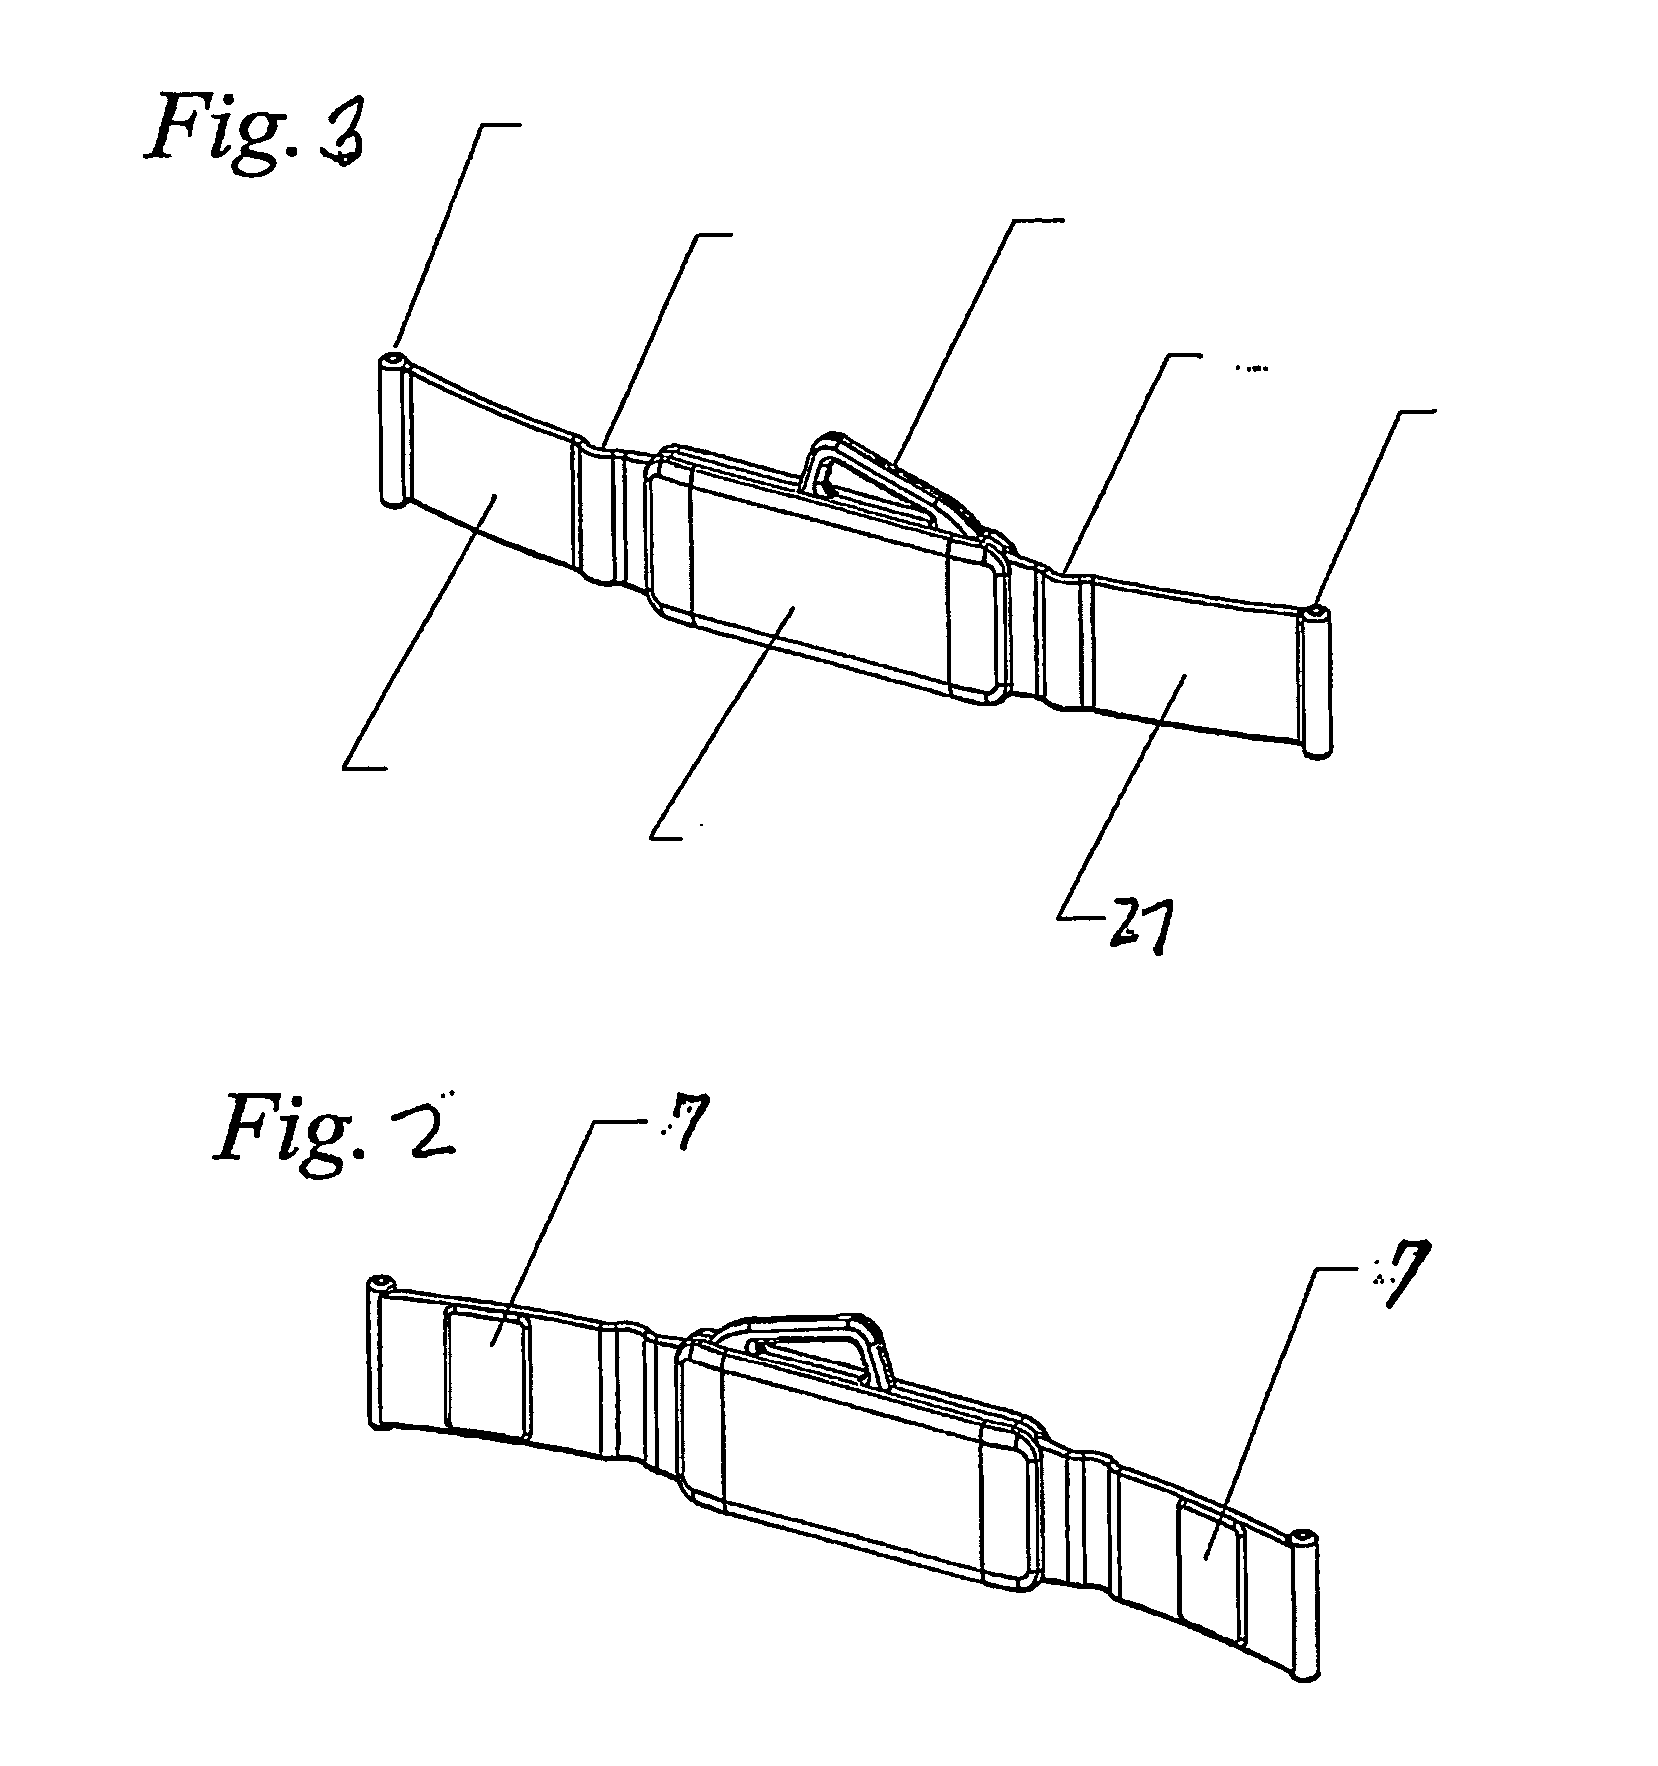 Respiration Motion Detection and Health State Assesment System